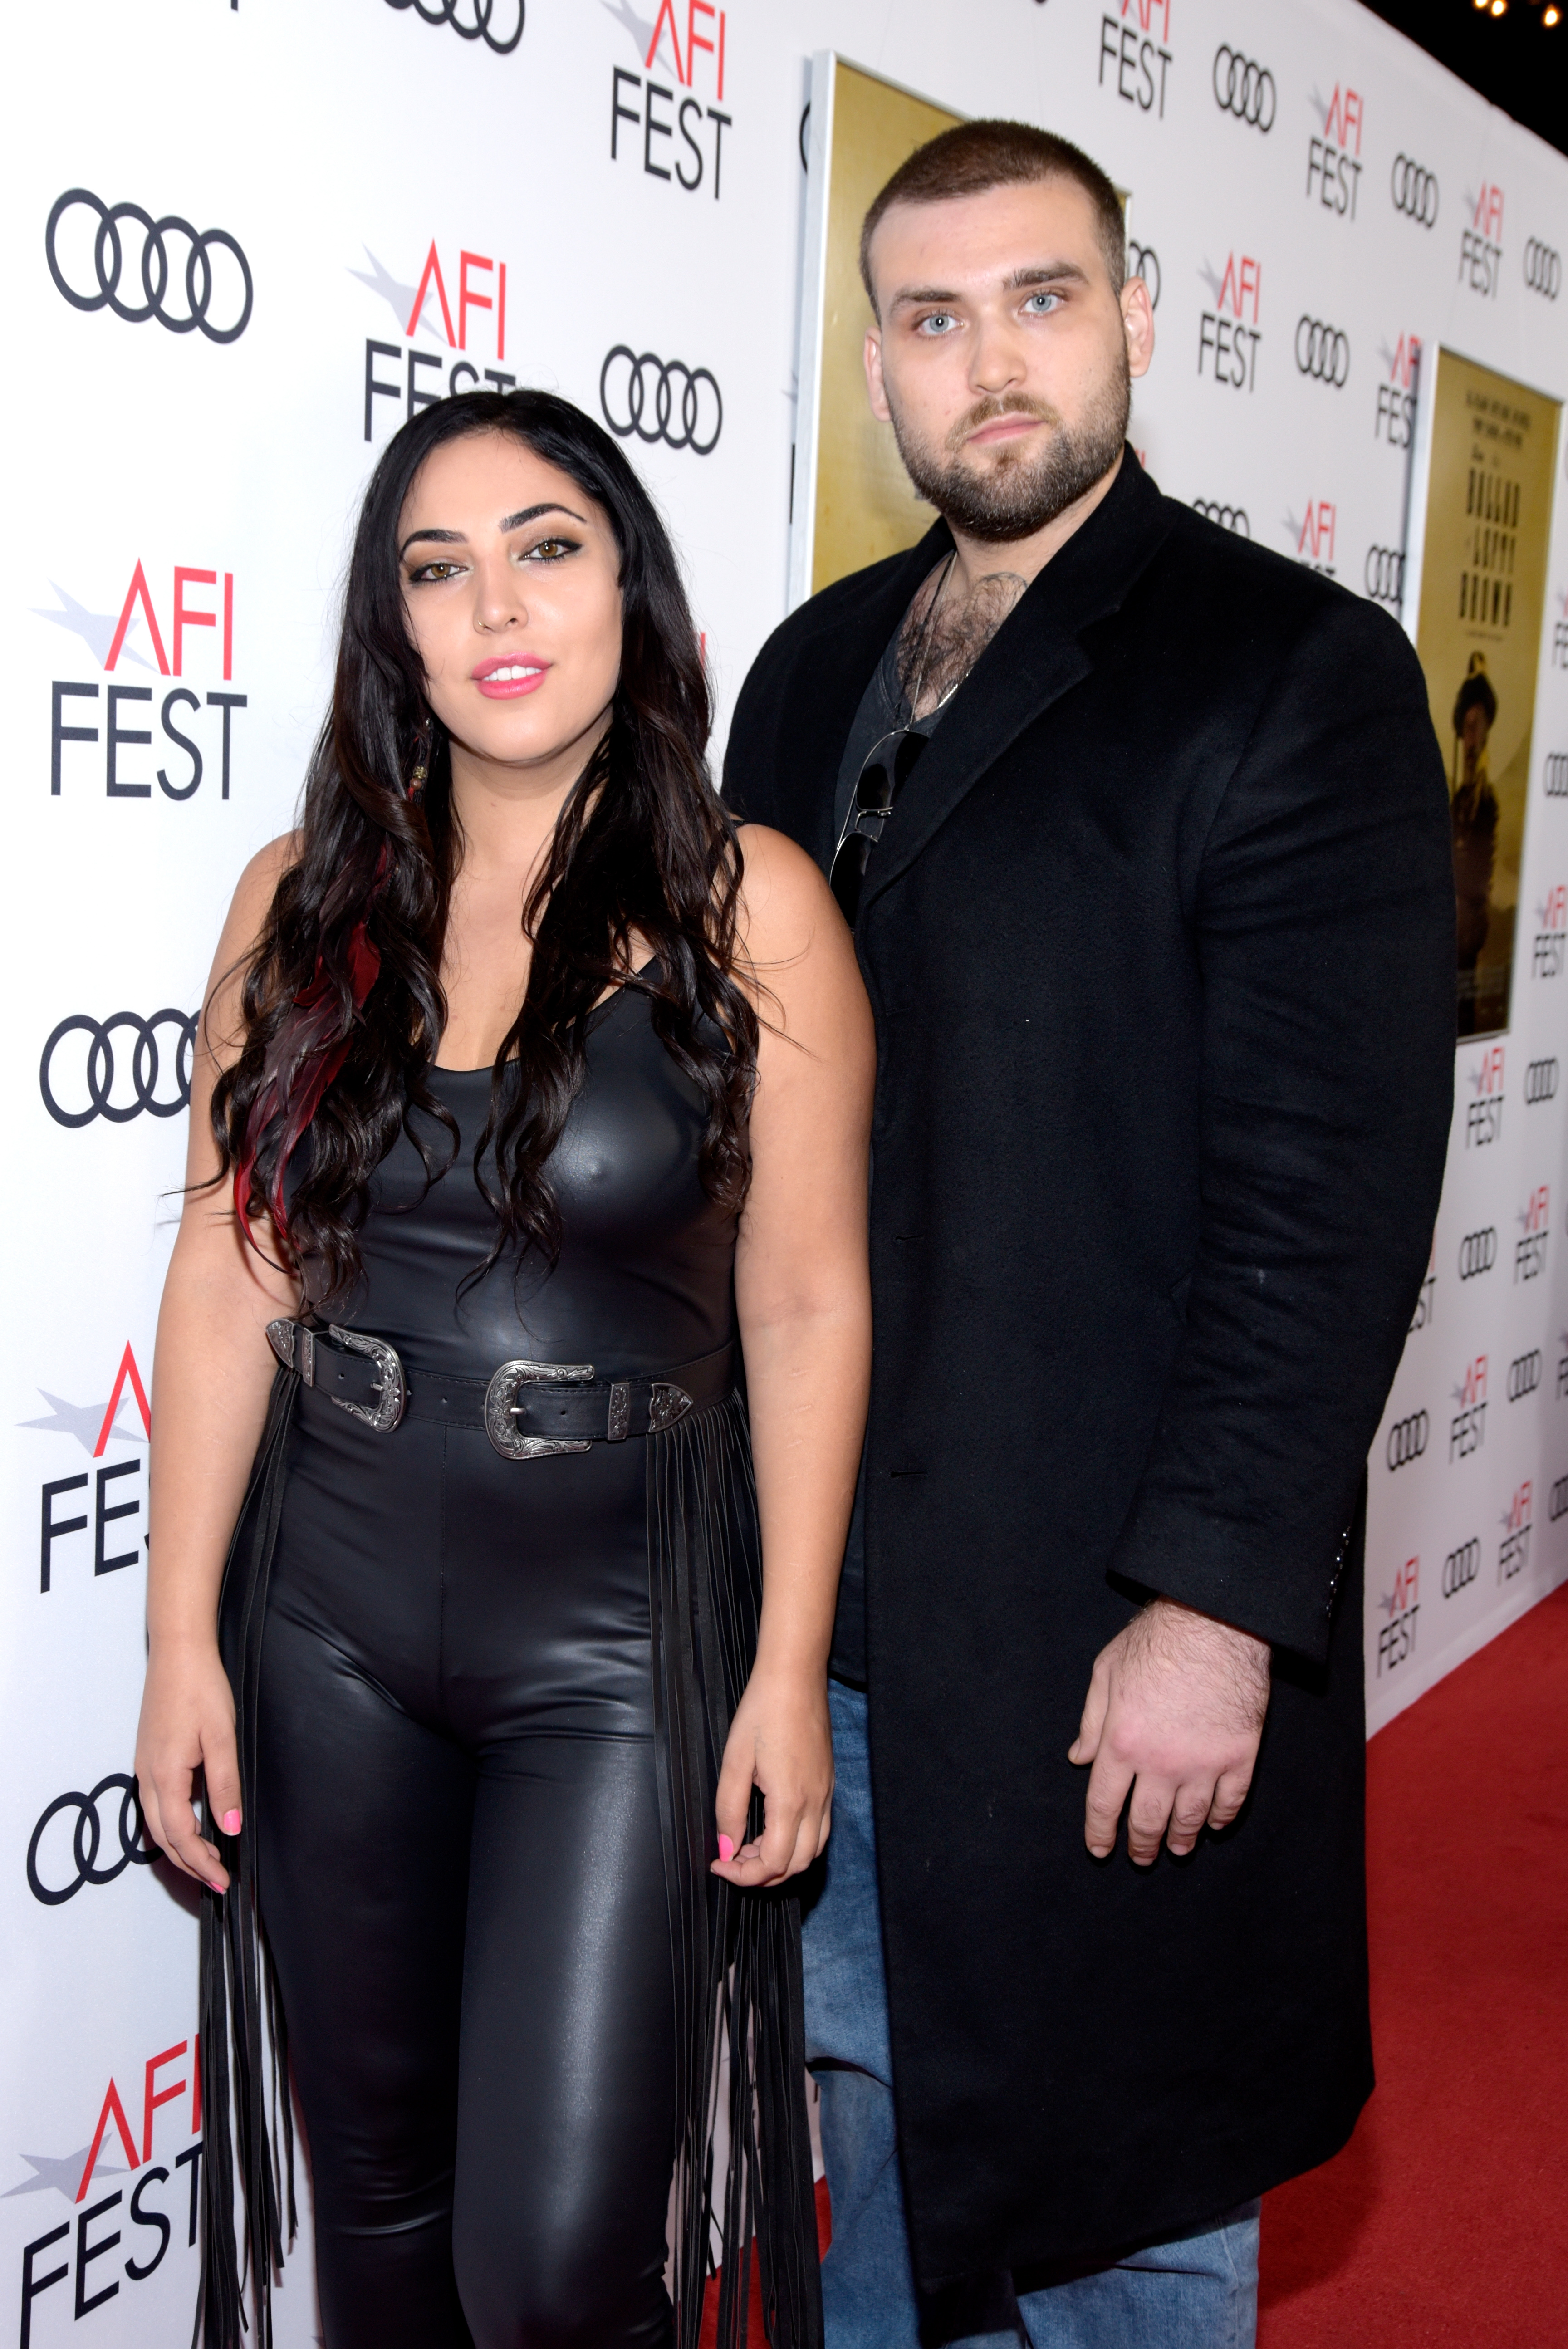 Hila Aronian and Weston Coppola Cage attend the screening of "The Ballad of Lefty Brown" at AFI FEST Presented By Audi in Hollywood, California, on November 14, 2017. | Source: Getty Images